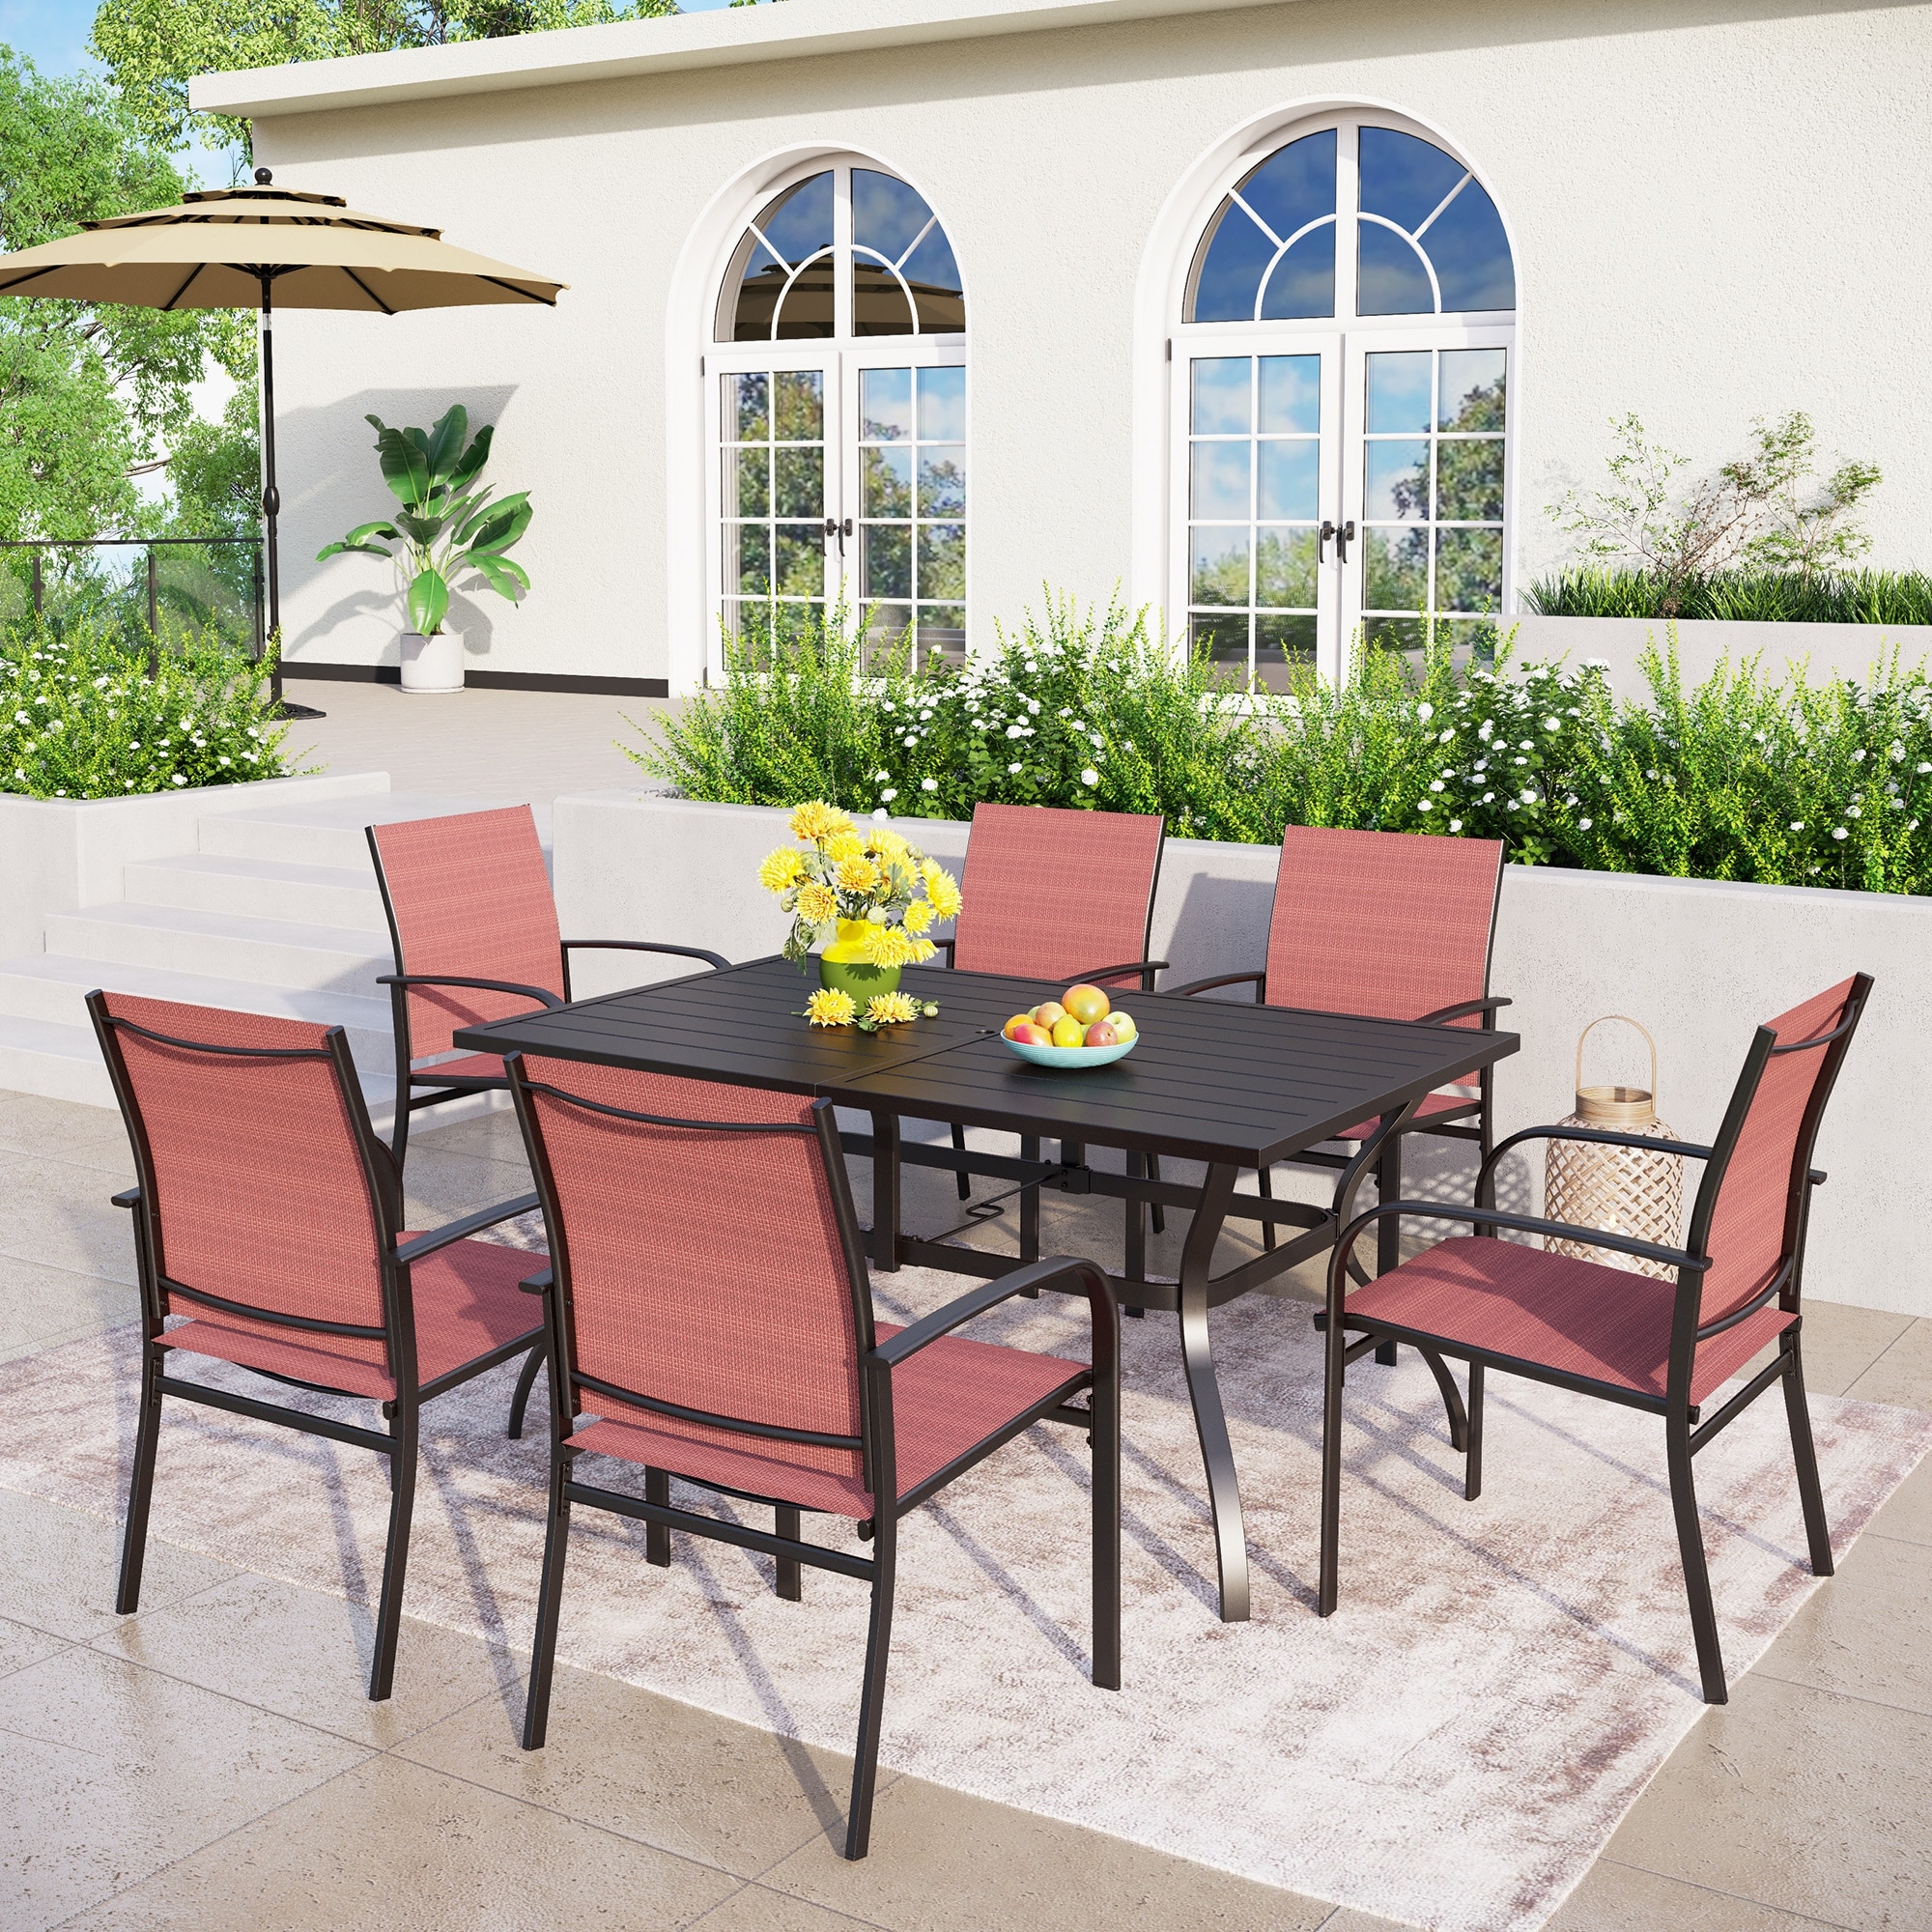 Patio Dining Set 7 Piece Metal Rectangle Table And 6 Textilene Chairs